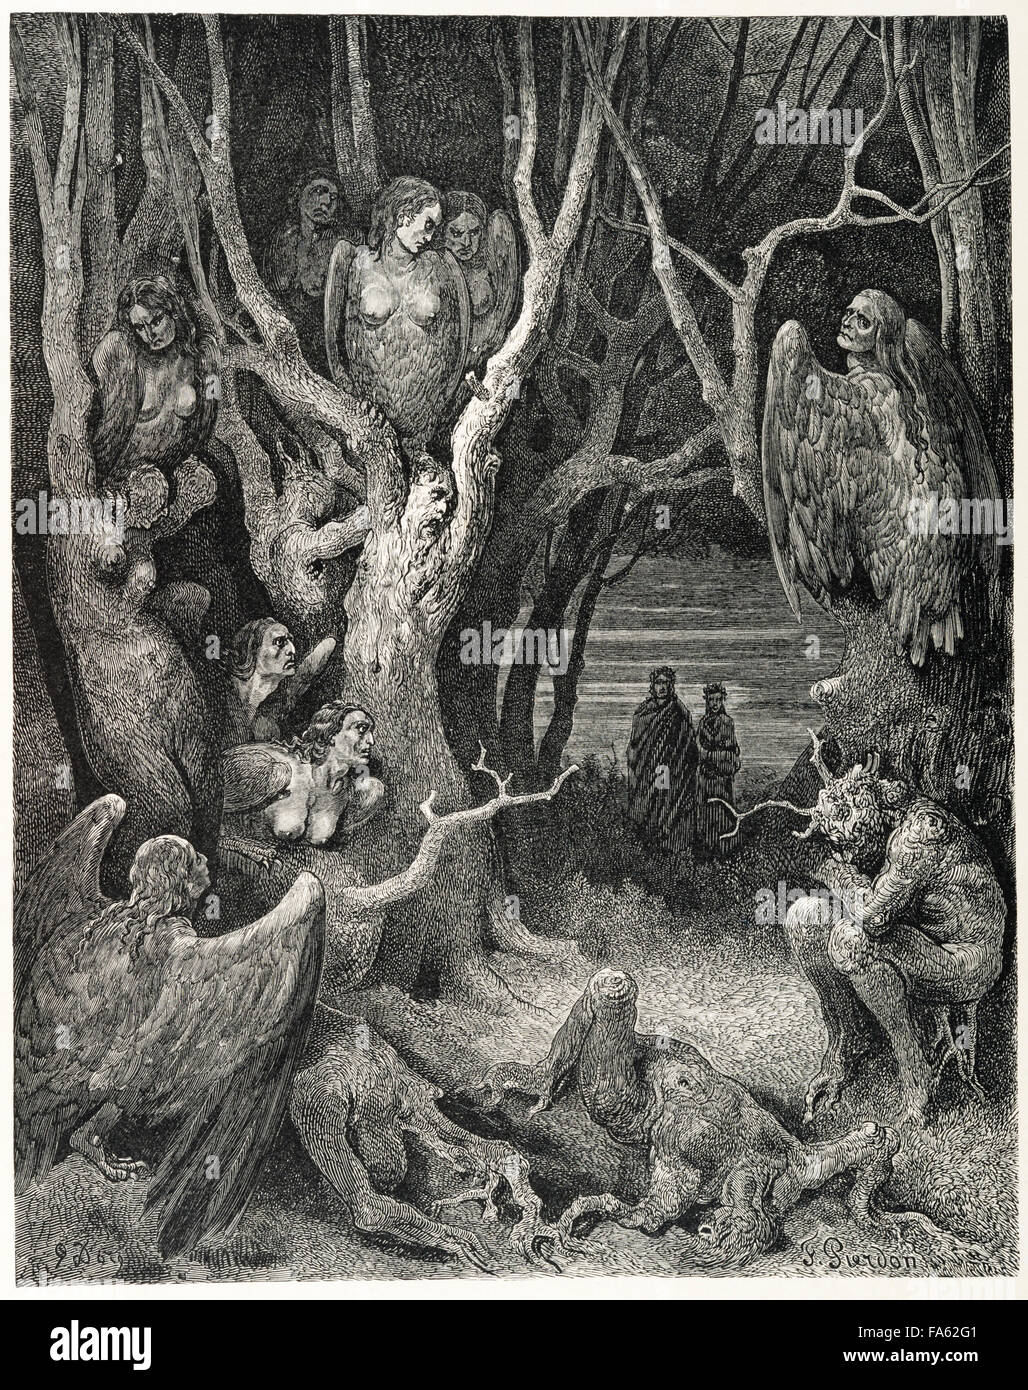 l'Inferno (The Vision of Hell) by the 13c Italian poet Dante Alighieri, illustrated by the 19c French artist Gustave Doré. The Seventh Circle of Hell, where the violent are punished. Here suicides are punished, being transformed into trees and then fed upon by Harpies. {Canto XIII, line 11) Stock Photo